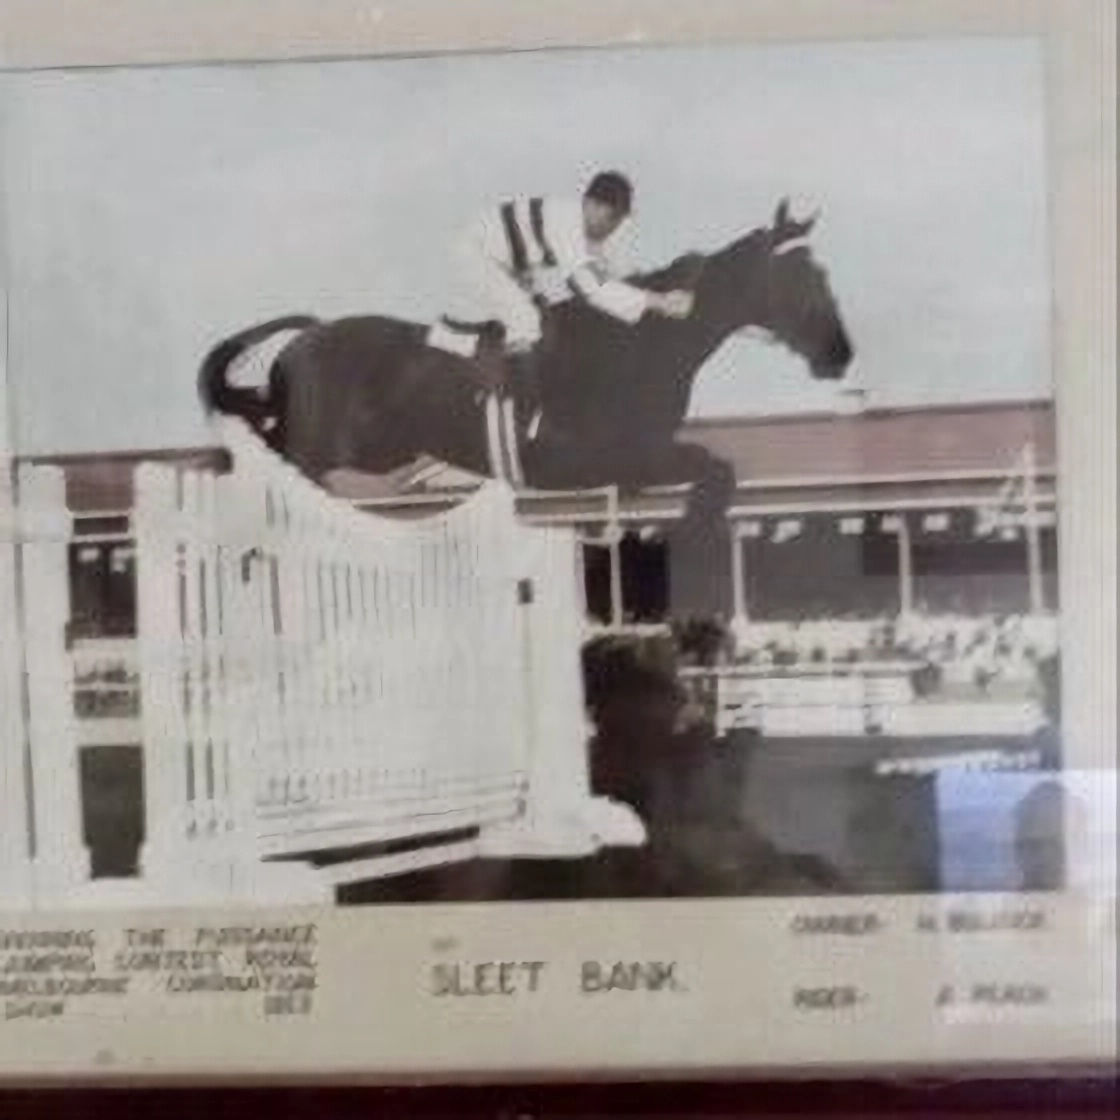 Allan Peach winning the Inaugural Puissance held in Australia at the Royal Melbourne Coronation Show in 1953, jumping A Riviera Gate,  height was 6ft. 2 The horse was named SLEET BANK